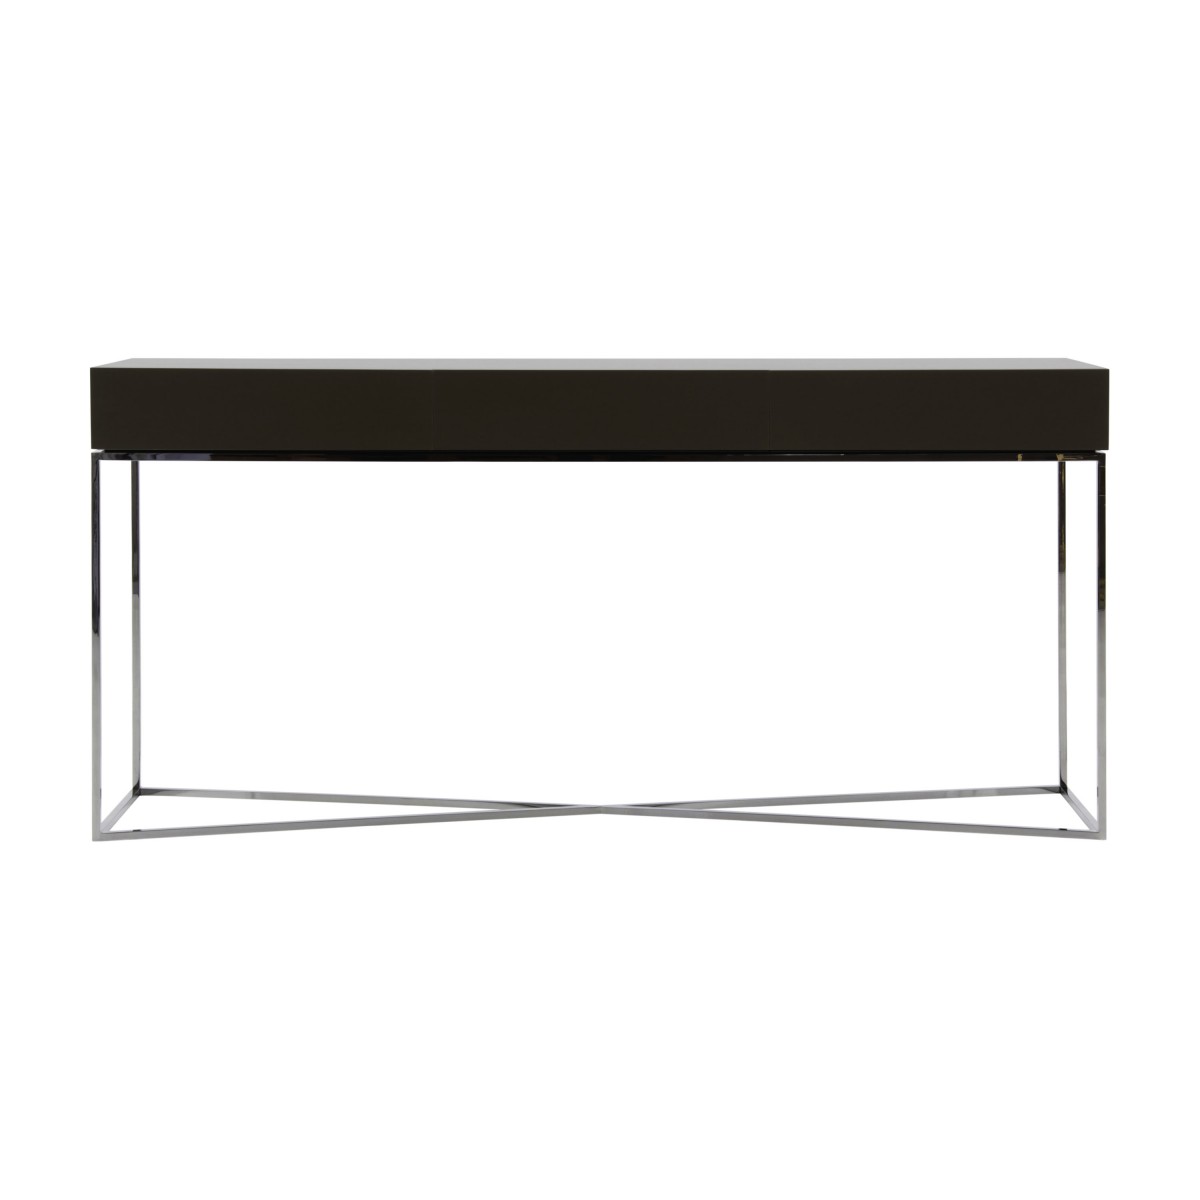 Italian contemporary consolle - modern 3 drawers consolle - Italian consolle with chromed metal base